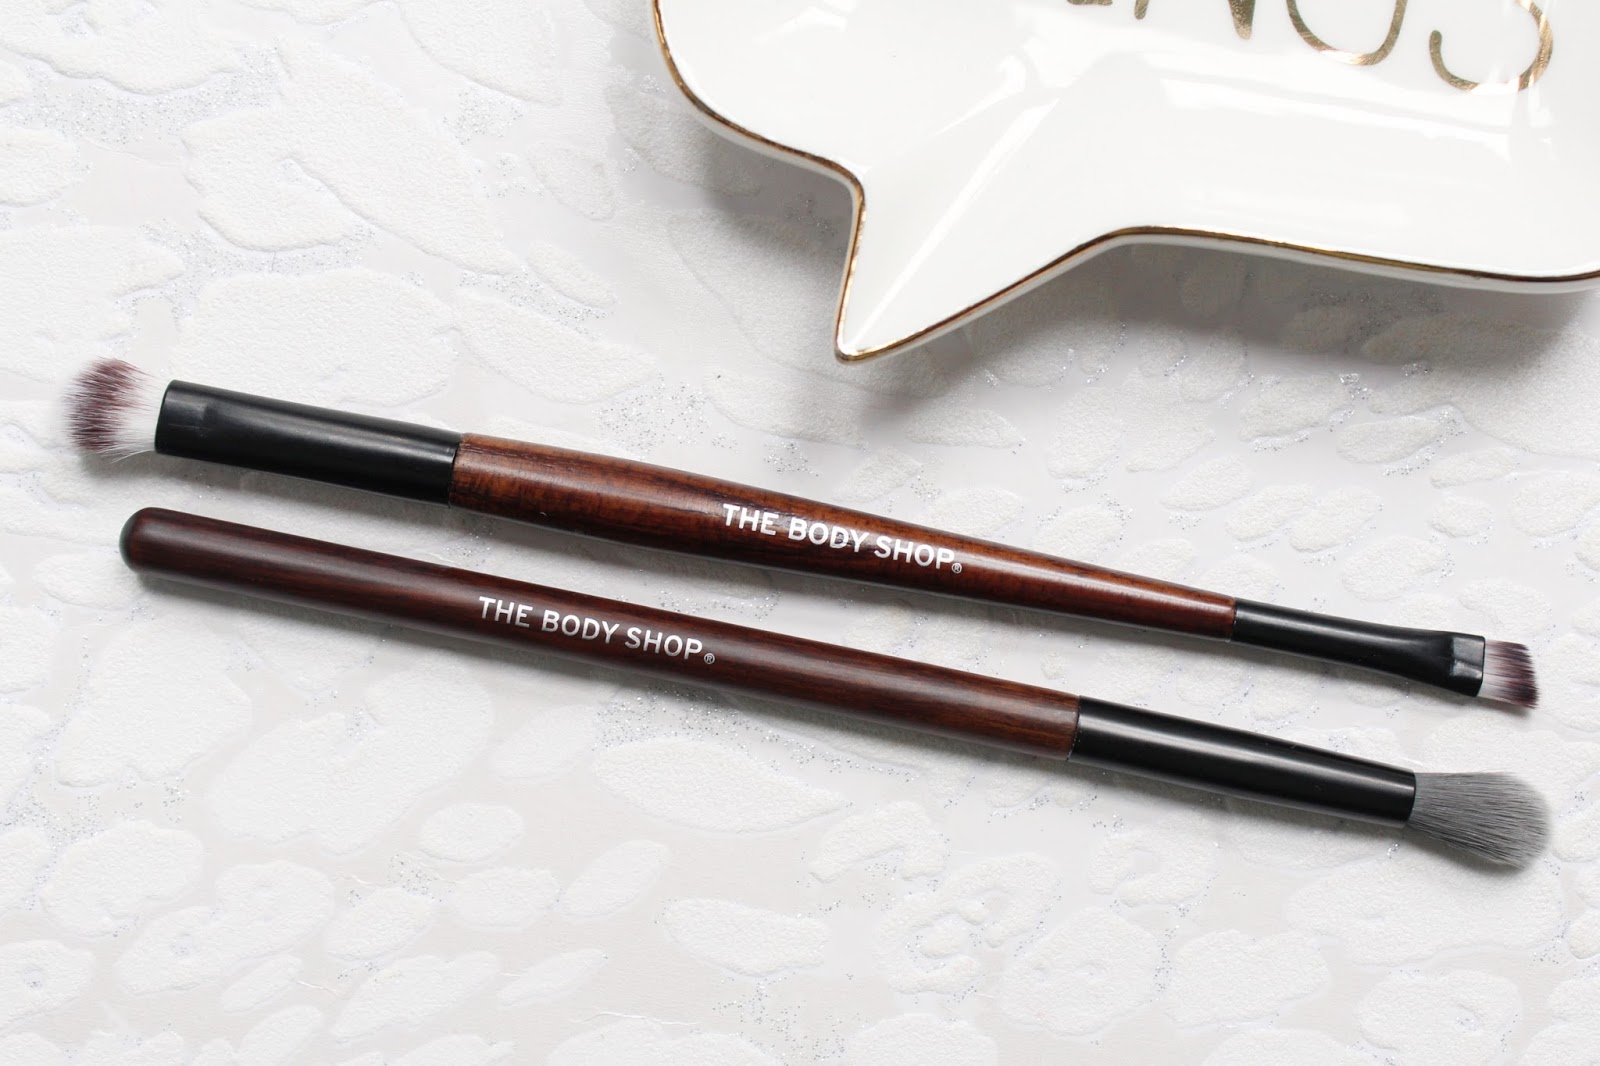 The Body Shop Makeup Brushes 